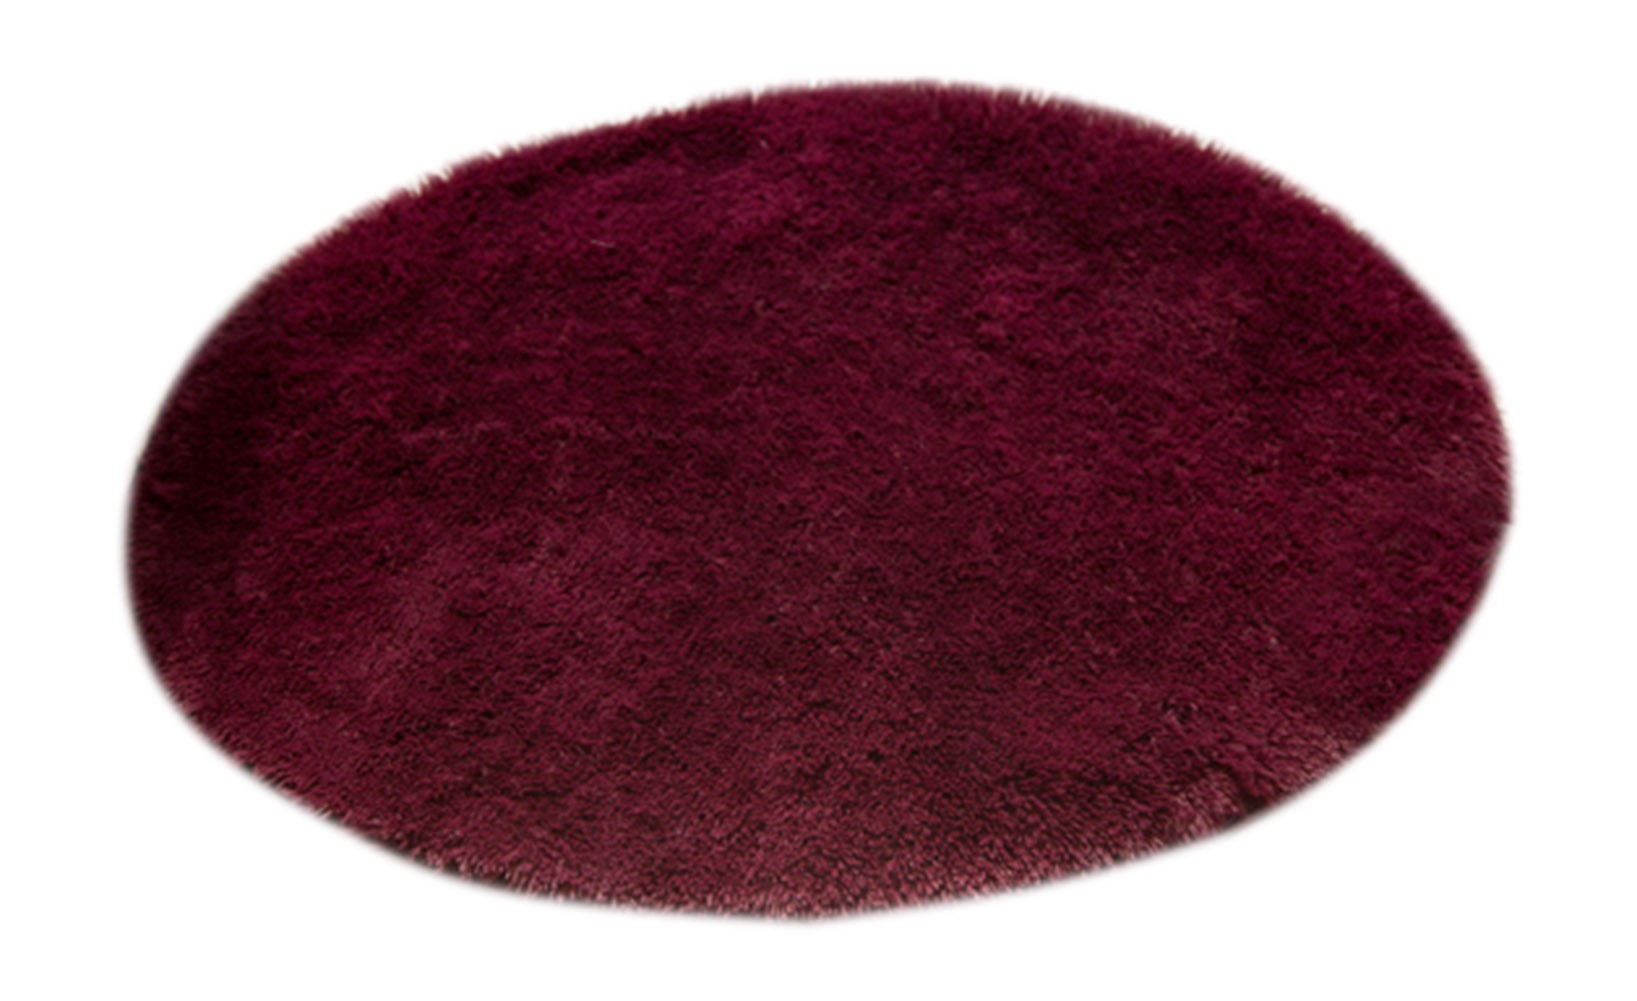 [Circle] Home Decor Rug Bathroom/Living Room Carpet Indoor/Outdoor Mat,Red,31.5x31.5 inches